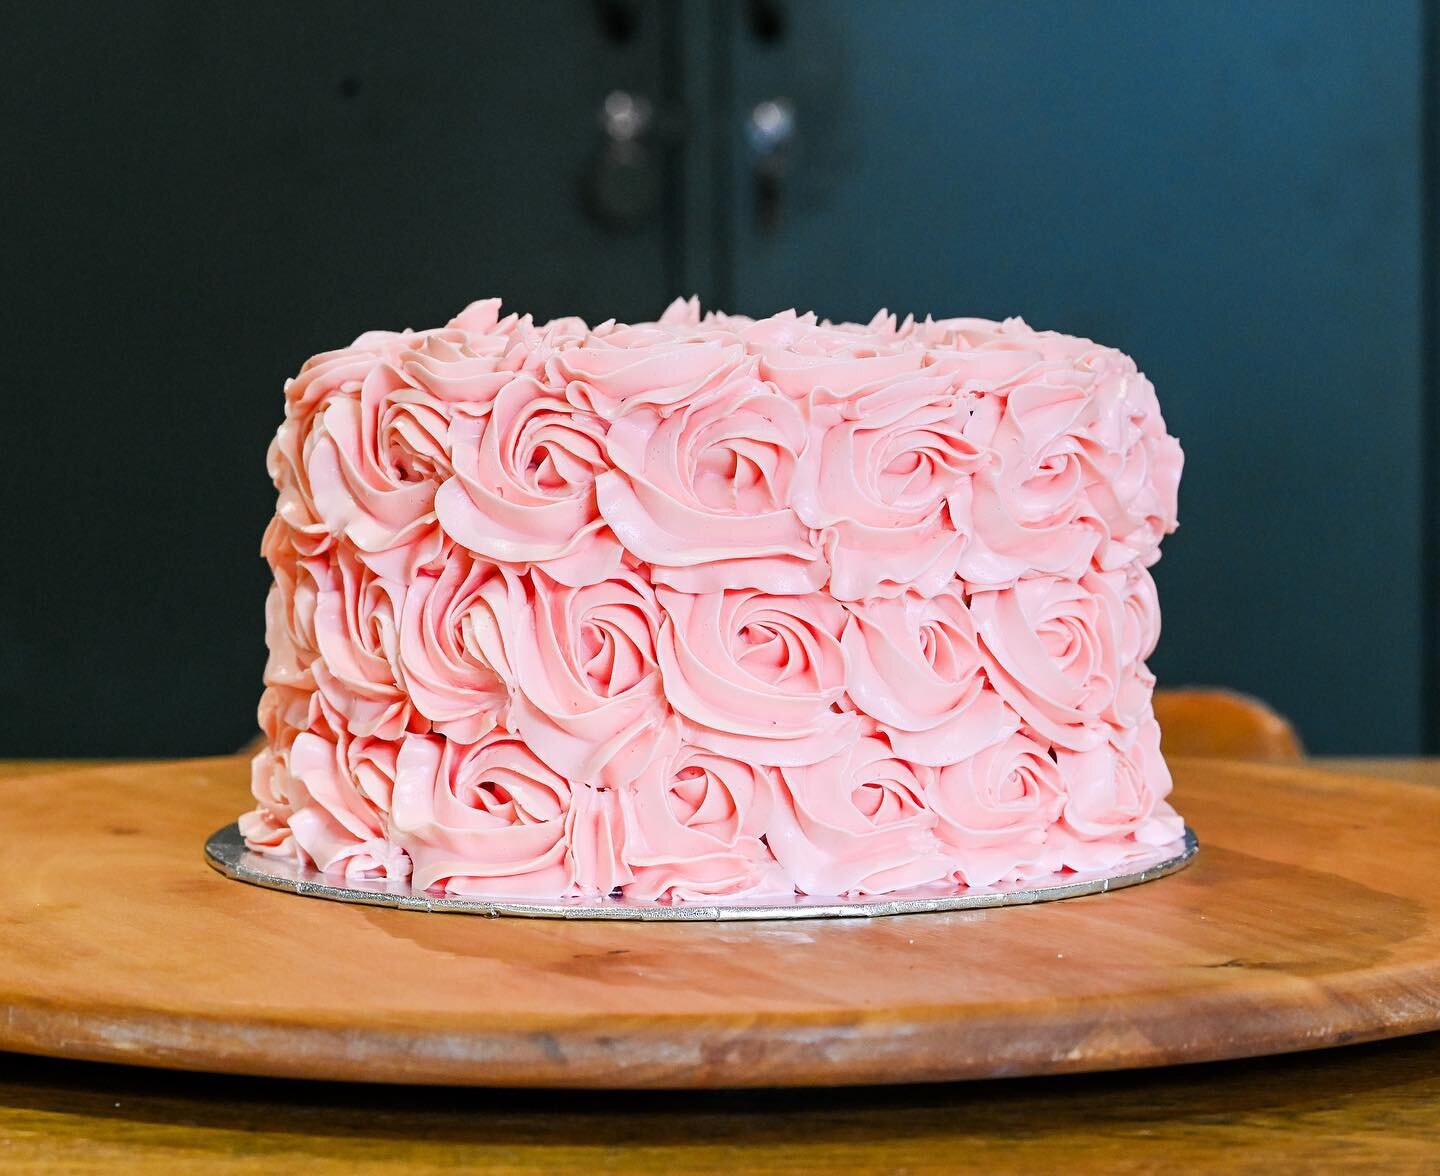 (SOLD) It doesn&rsquo;t happen often but I&rsquo;ve got a spare cake for sale! 

This rose cake with Swiss meringue buttercream is 8 inches in diameter and has beautiful chocolate cake inside. 

$85 and ready for collection Friday morning or Saturday